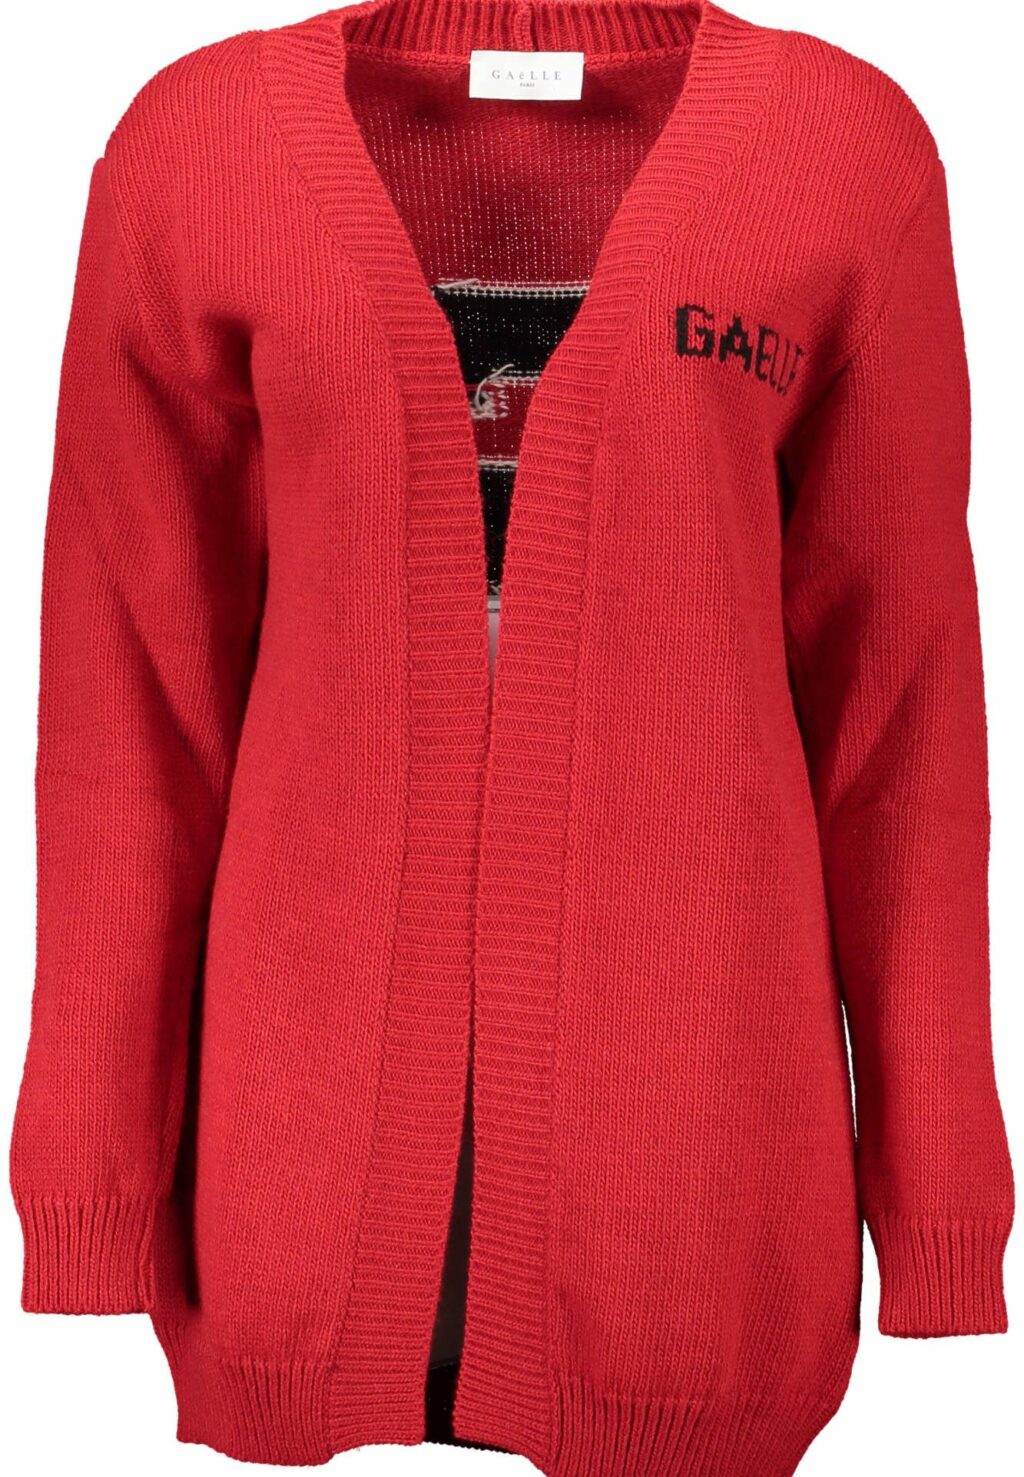 GAELLE PARIS CARDIGAN WOMAN RED GBD10329_ROSSO_ROSSO